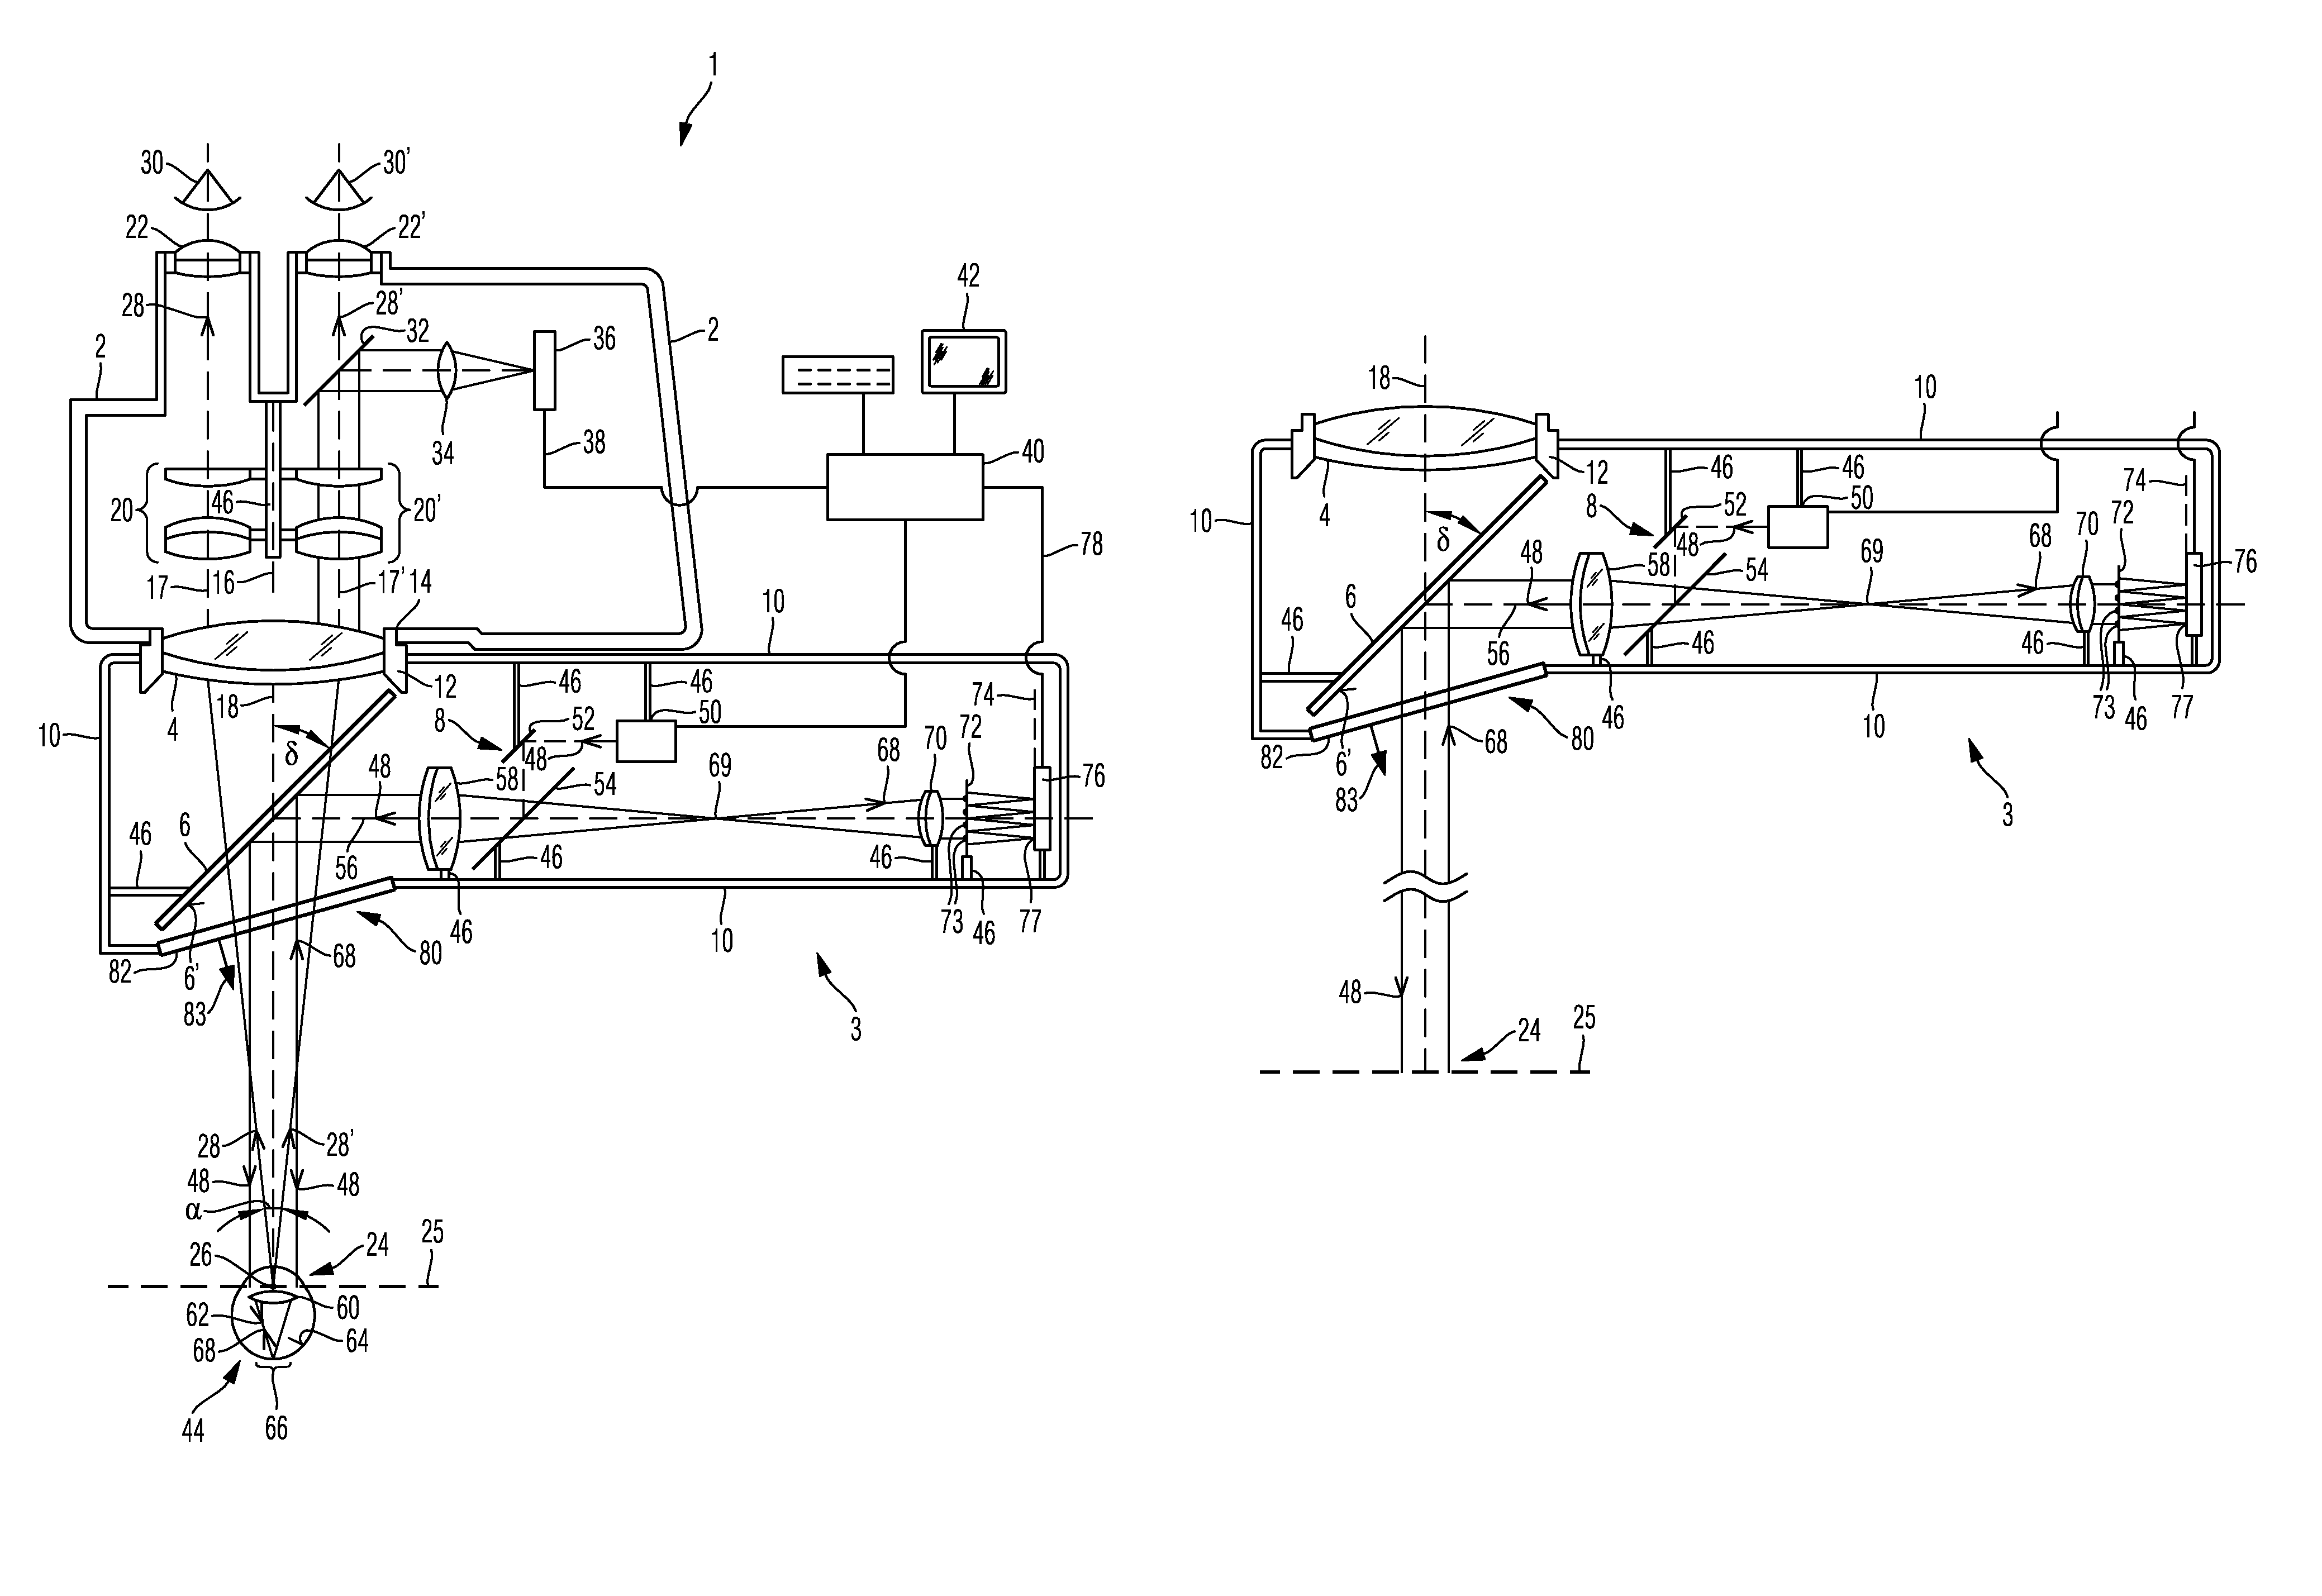 System for wavefront analysis and optical system having a microscope and a system for wavefront analysis